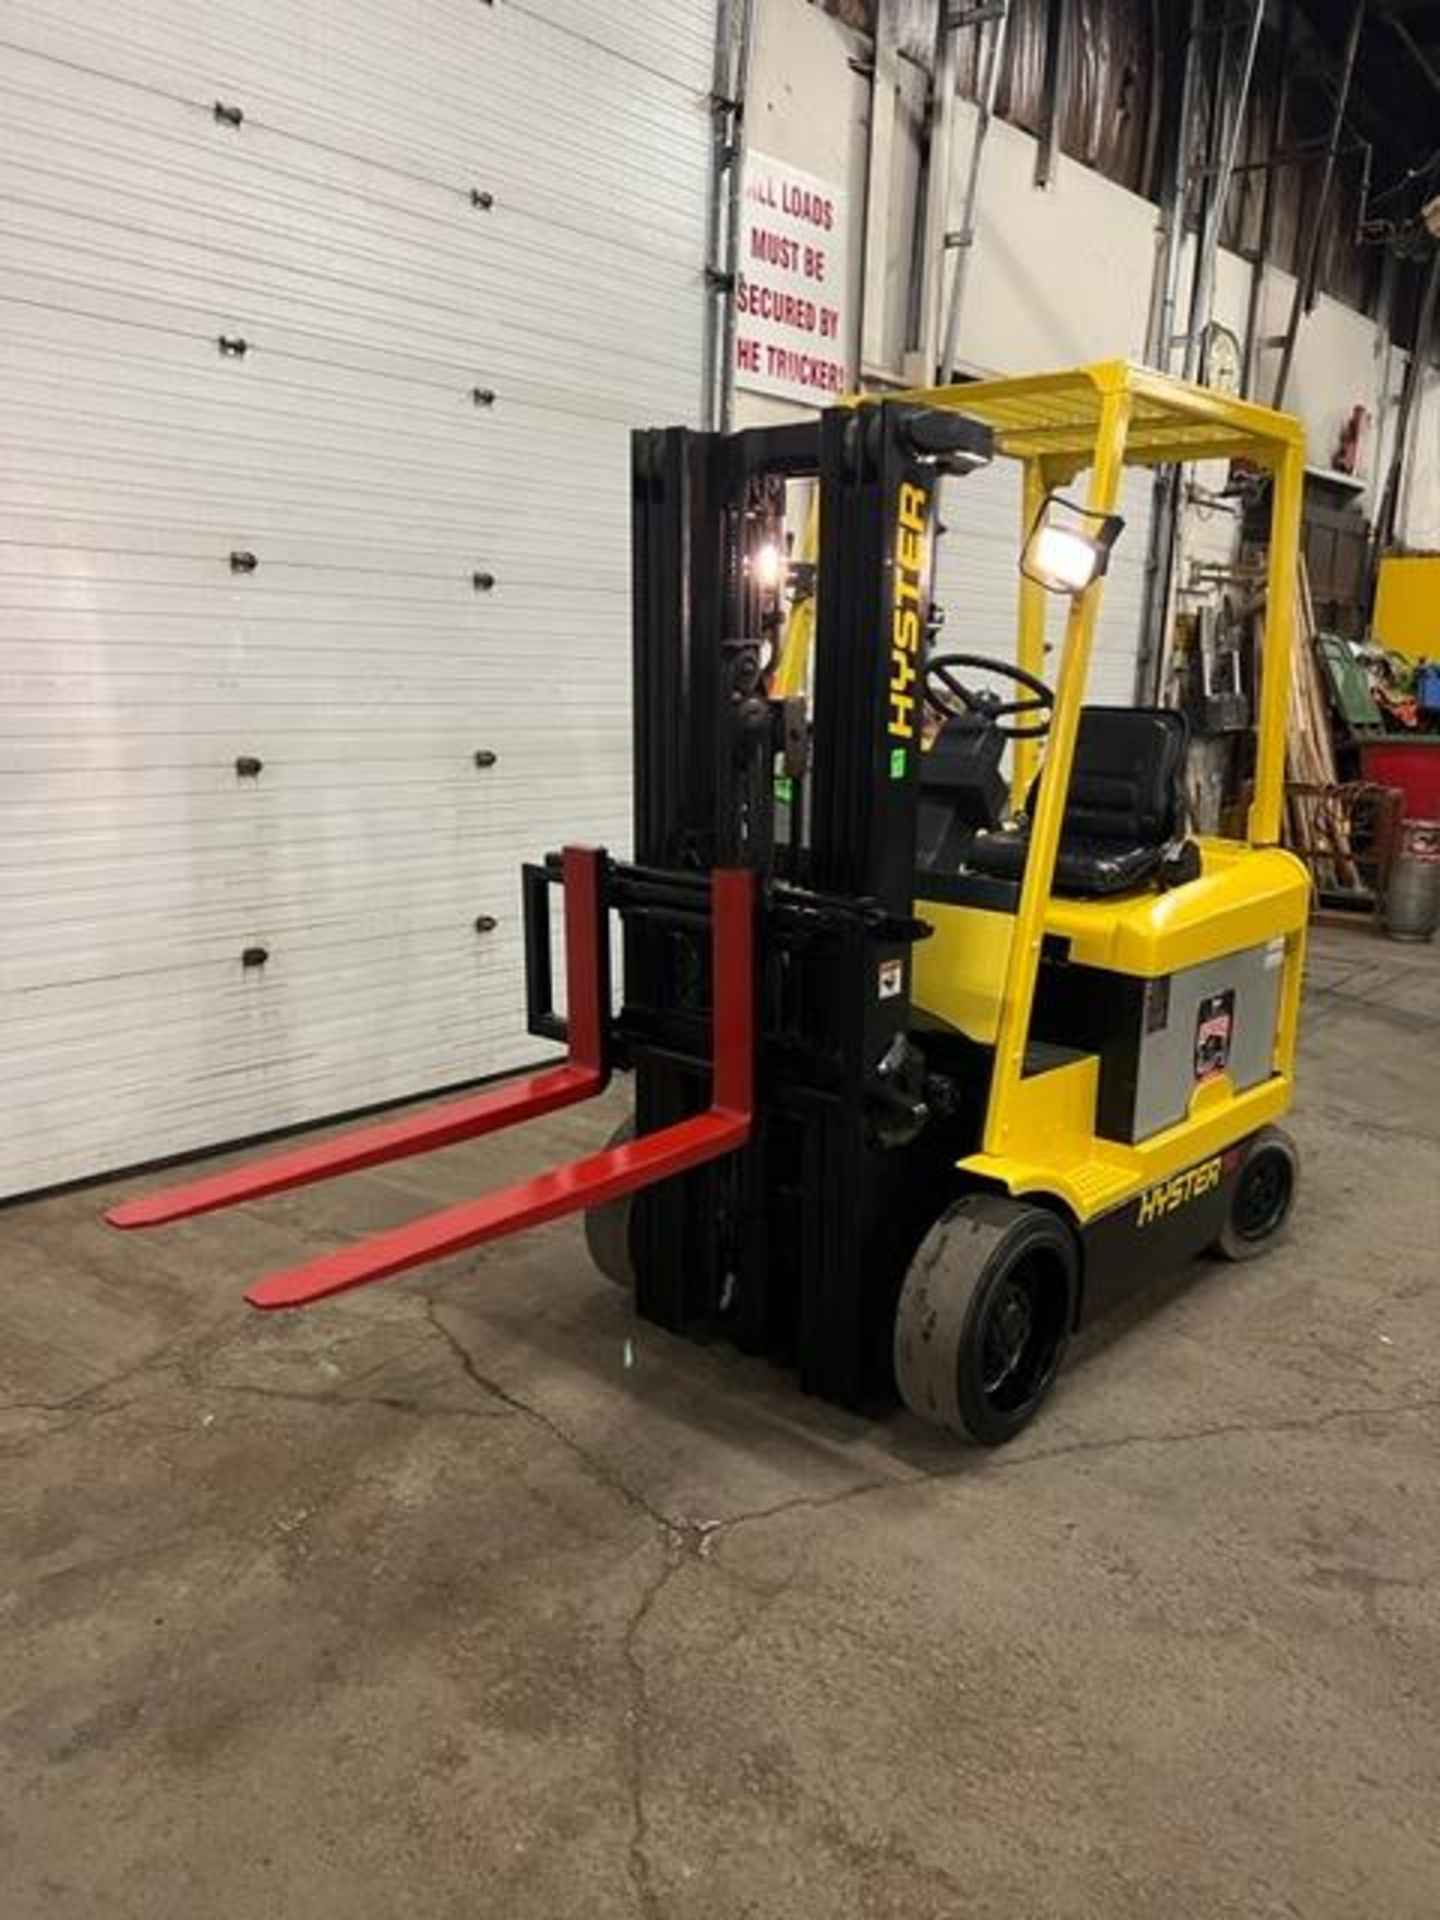 FREE CUSTOMS - MINT Hyster 5,000lbs Capacity Forklift Electric with 3-stage mast with SIDESHIFT - Image 2 of 3